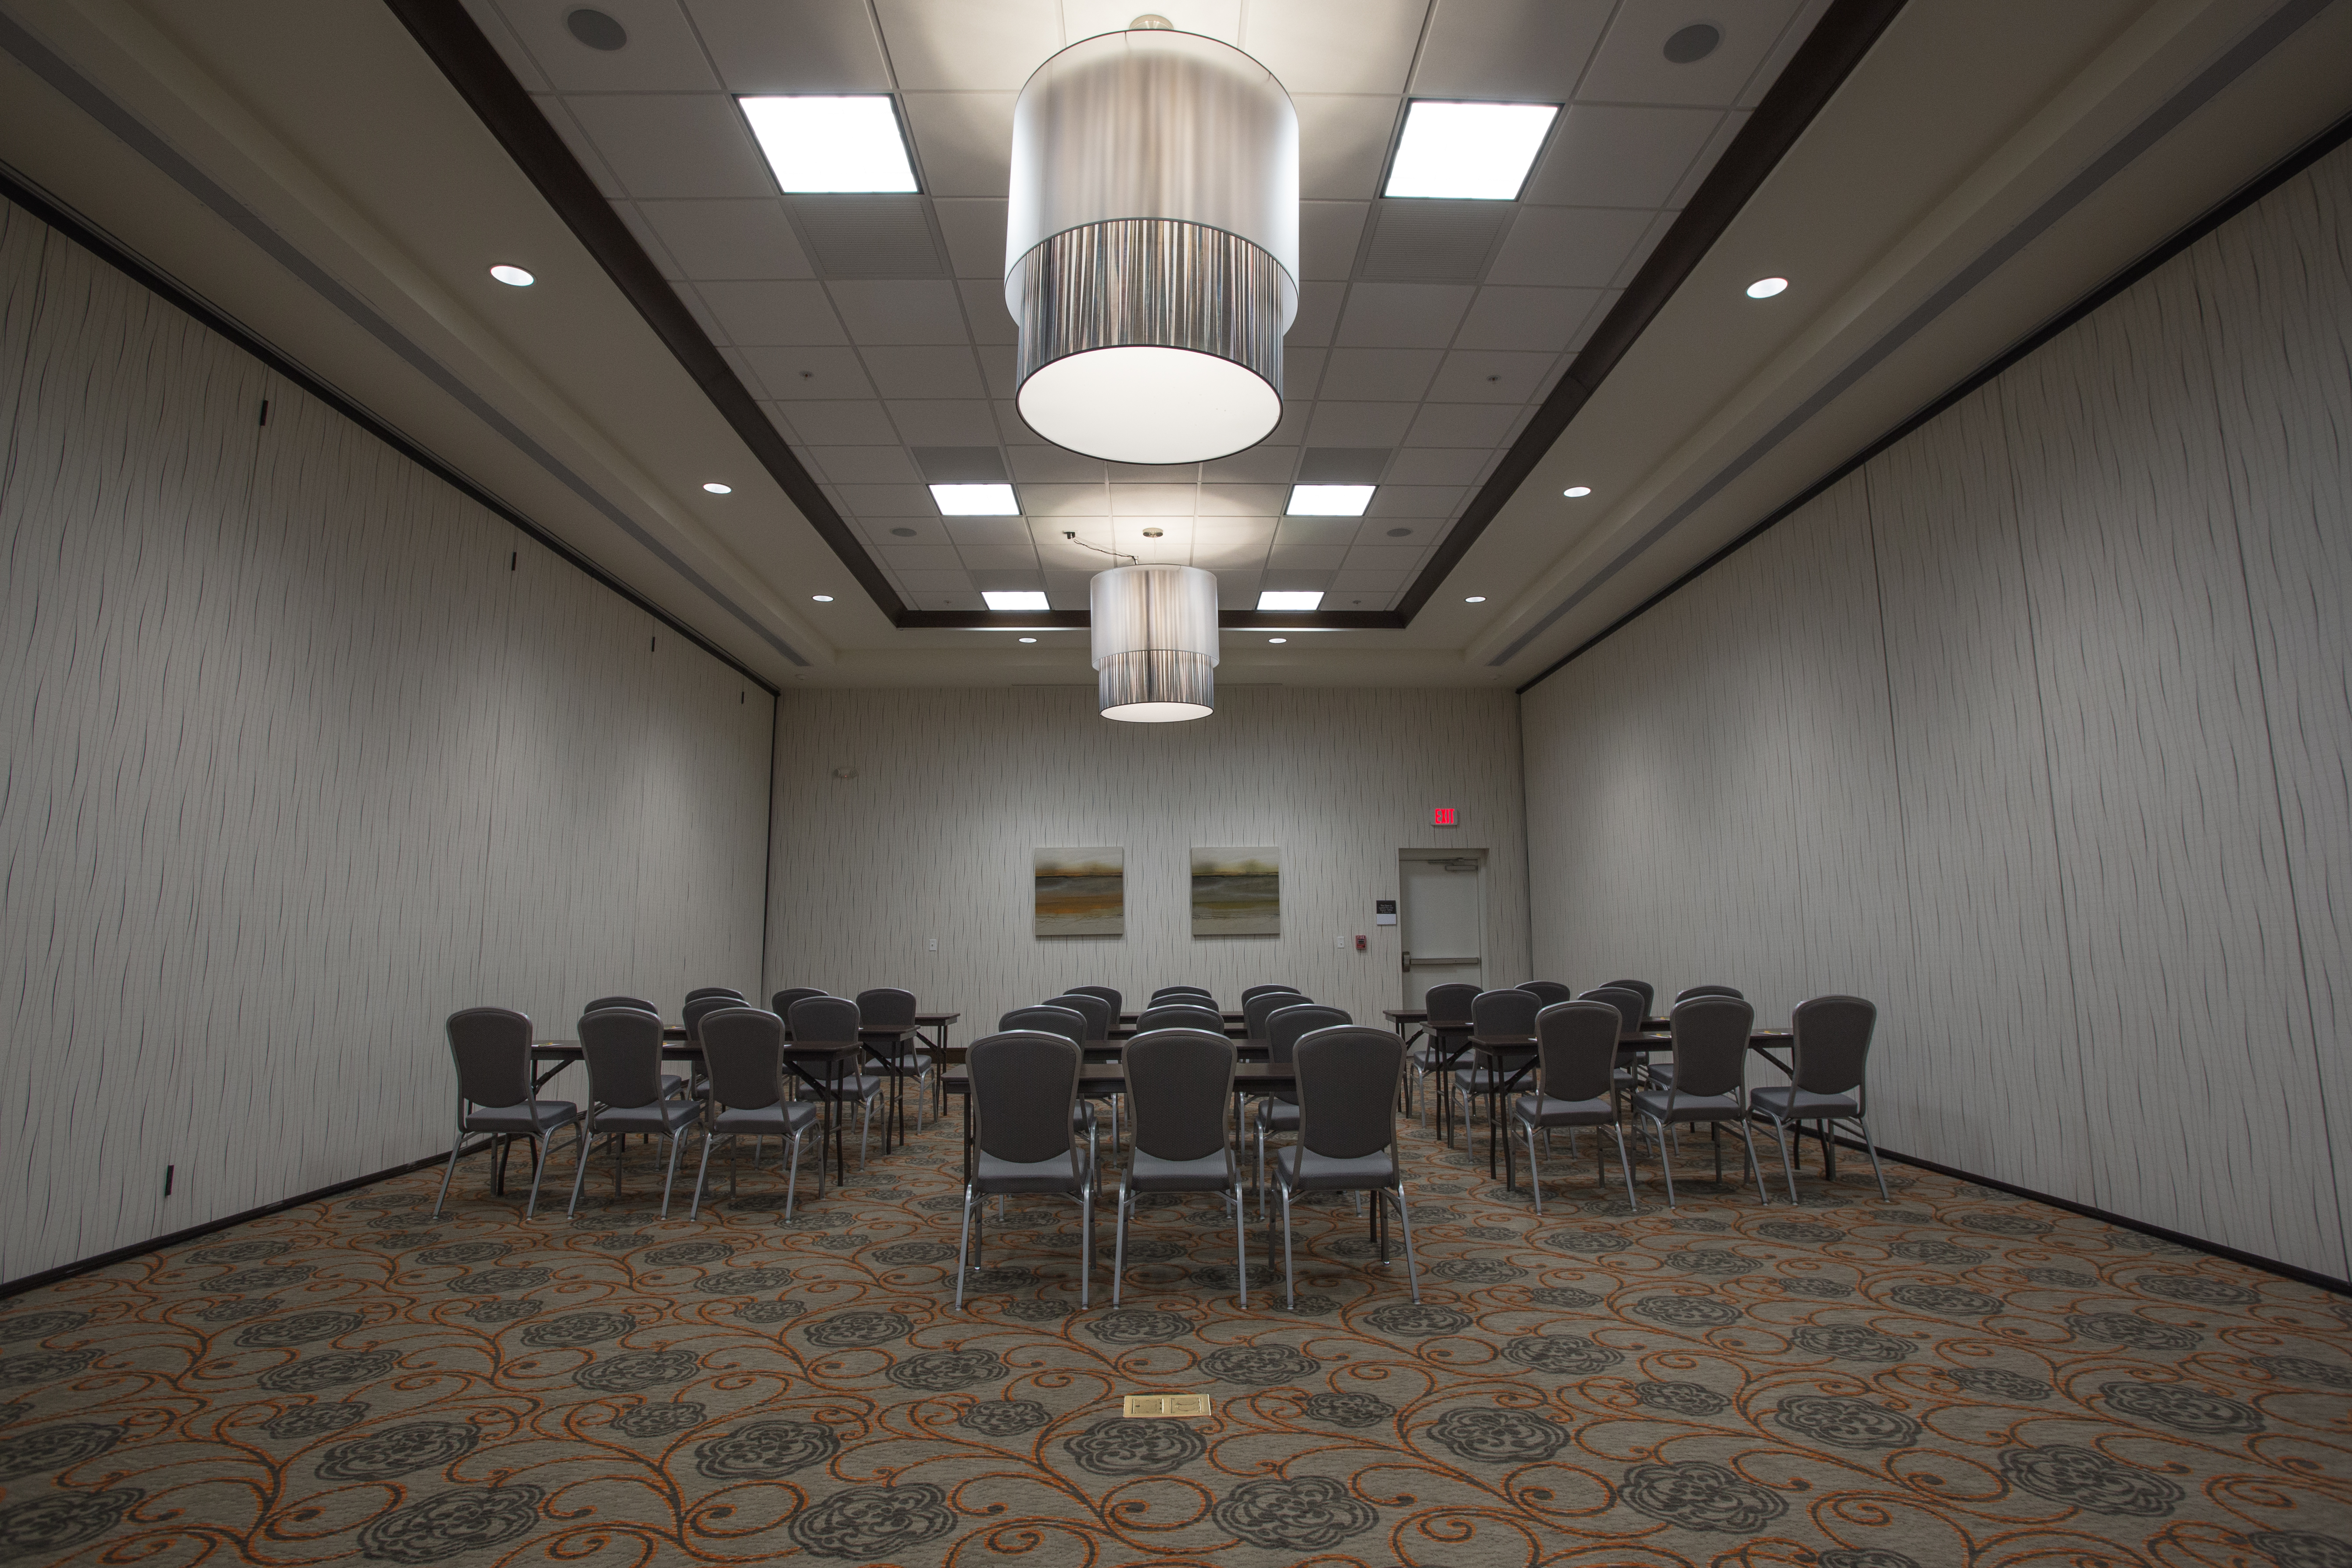 Large Ballroom Area with Chairs